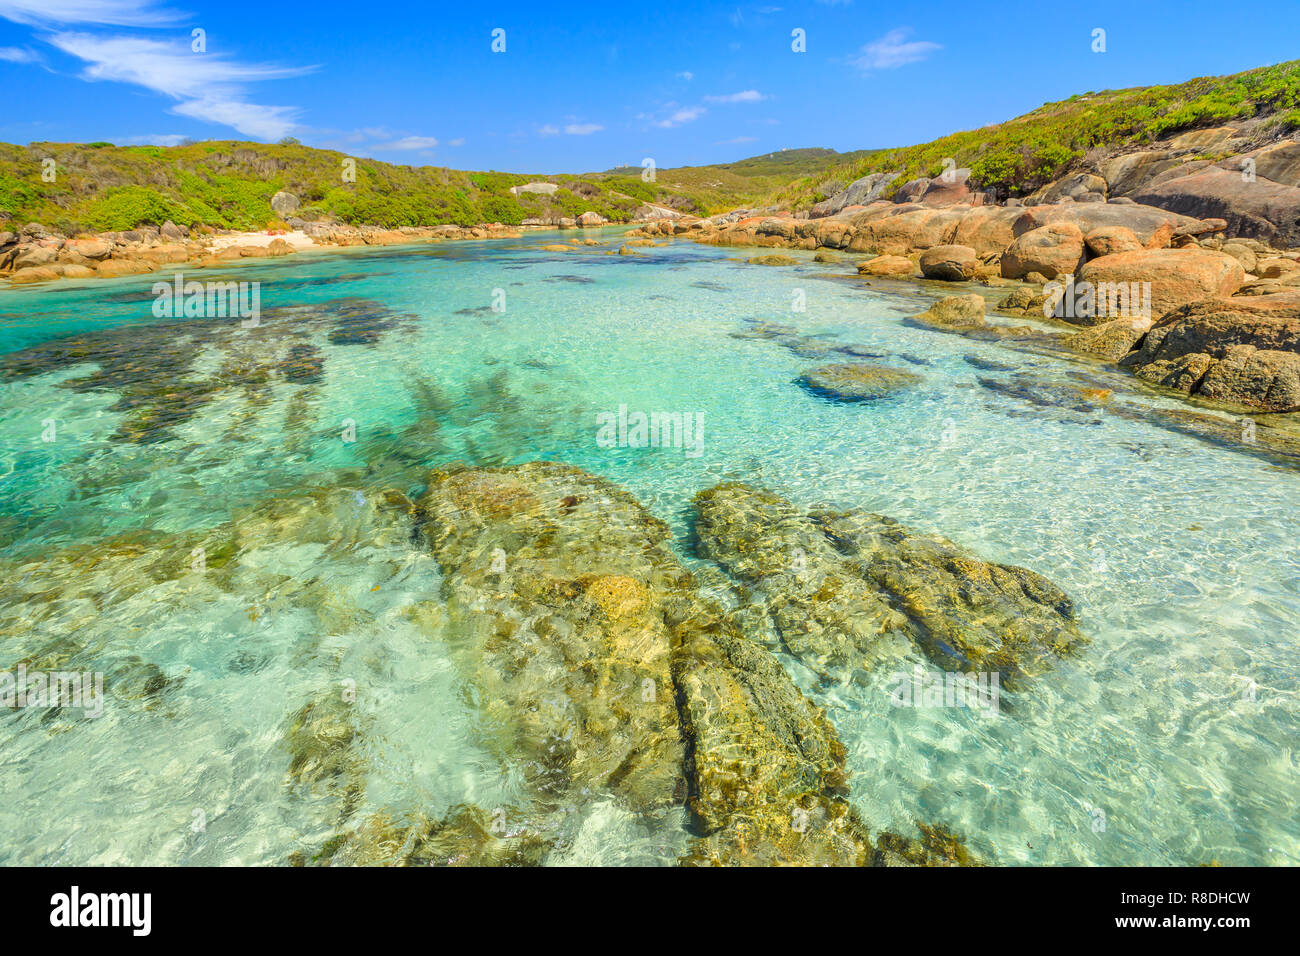 William Bay National Park, Denmark, Western Australia. Tropical landscape of turquoise waters of Madfish Beach surrounded by rock formations. Sunny blue sky. Popular summer destination in Australia. Stock Photo